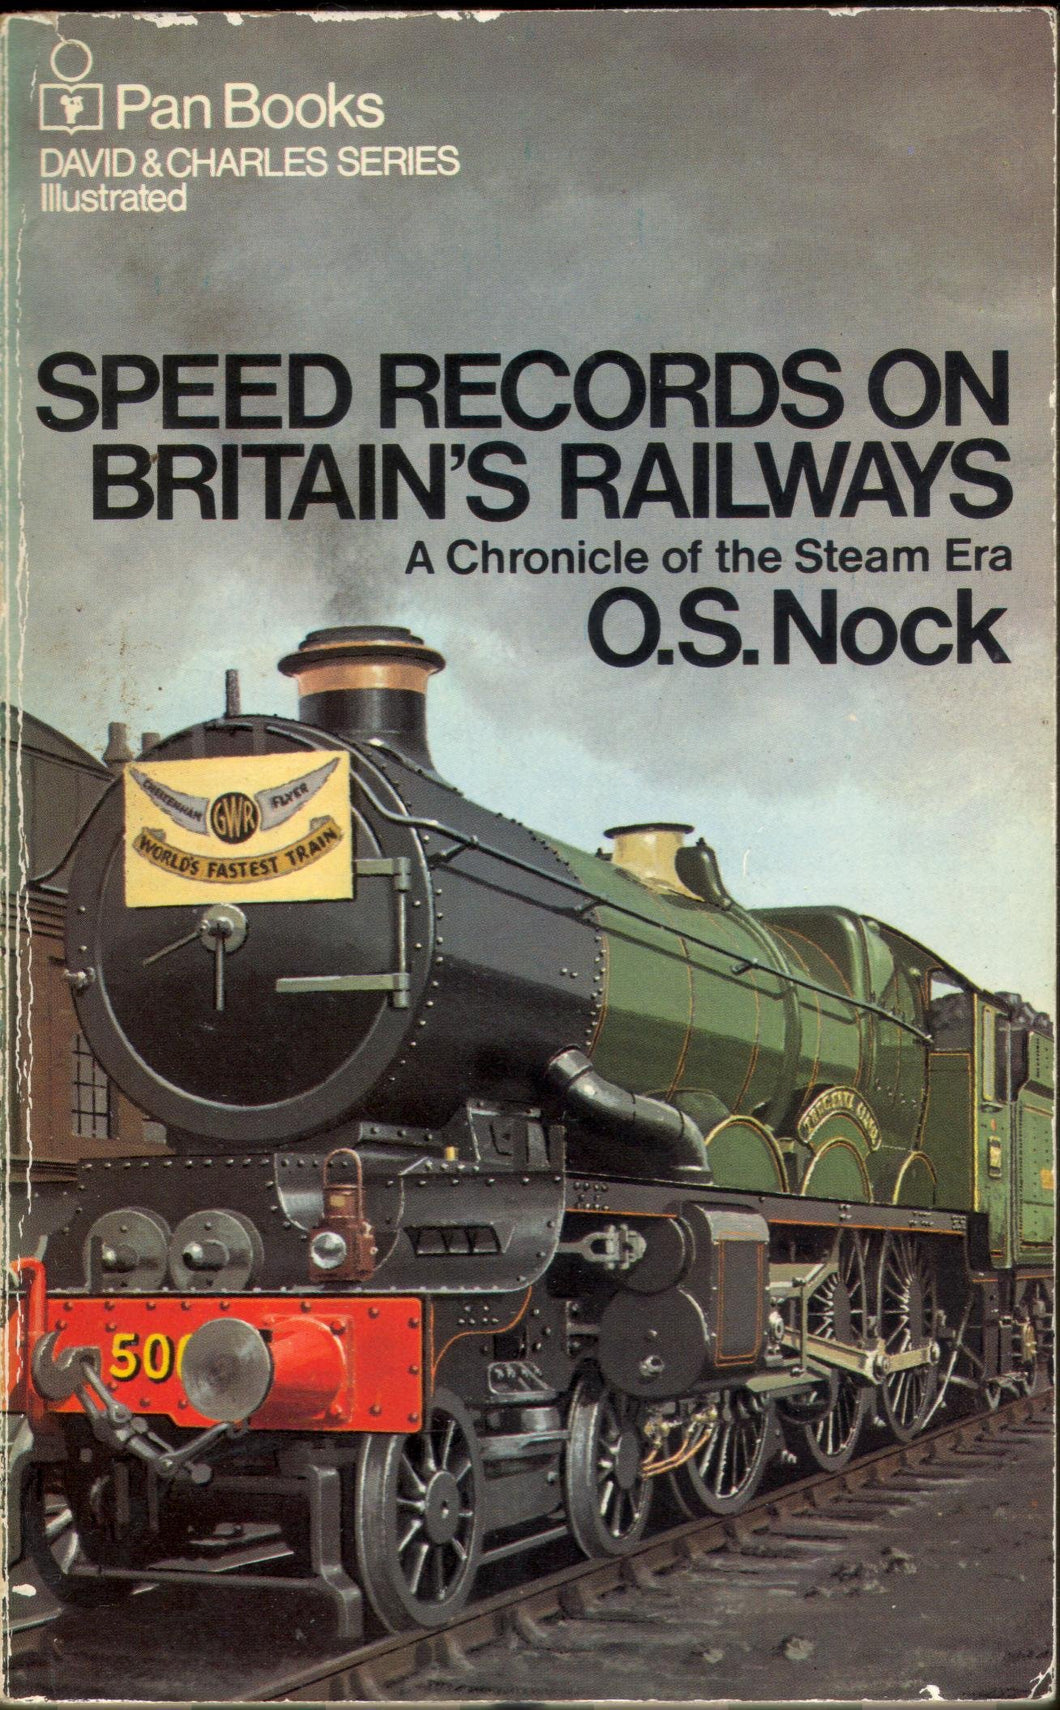 Speed Records on Britain's Railways: A Chronicle of the Steam Era (The David and Charles series) Nock, O. S.